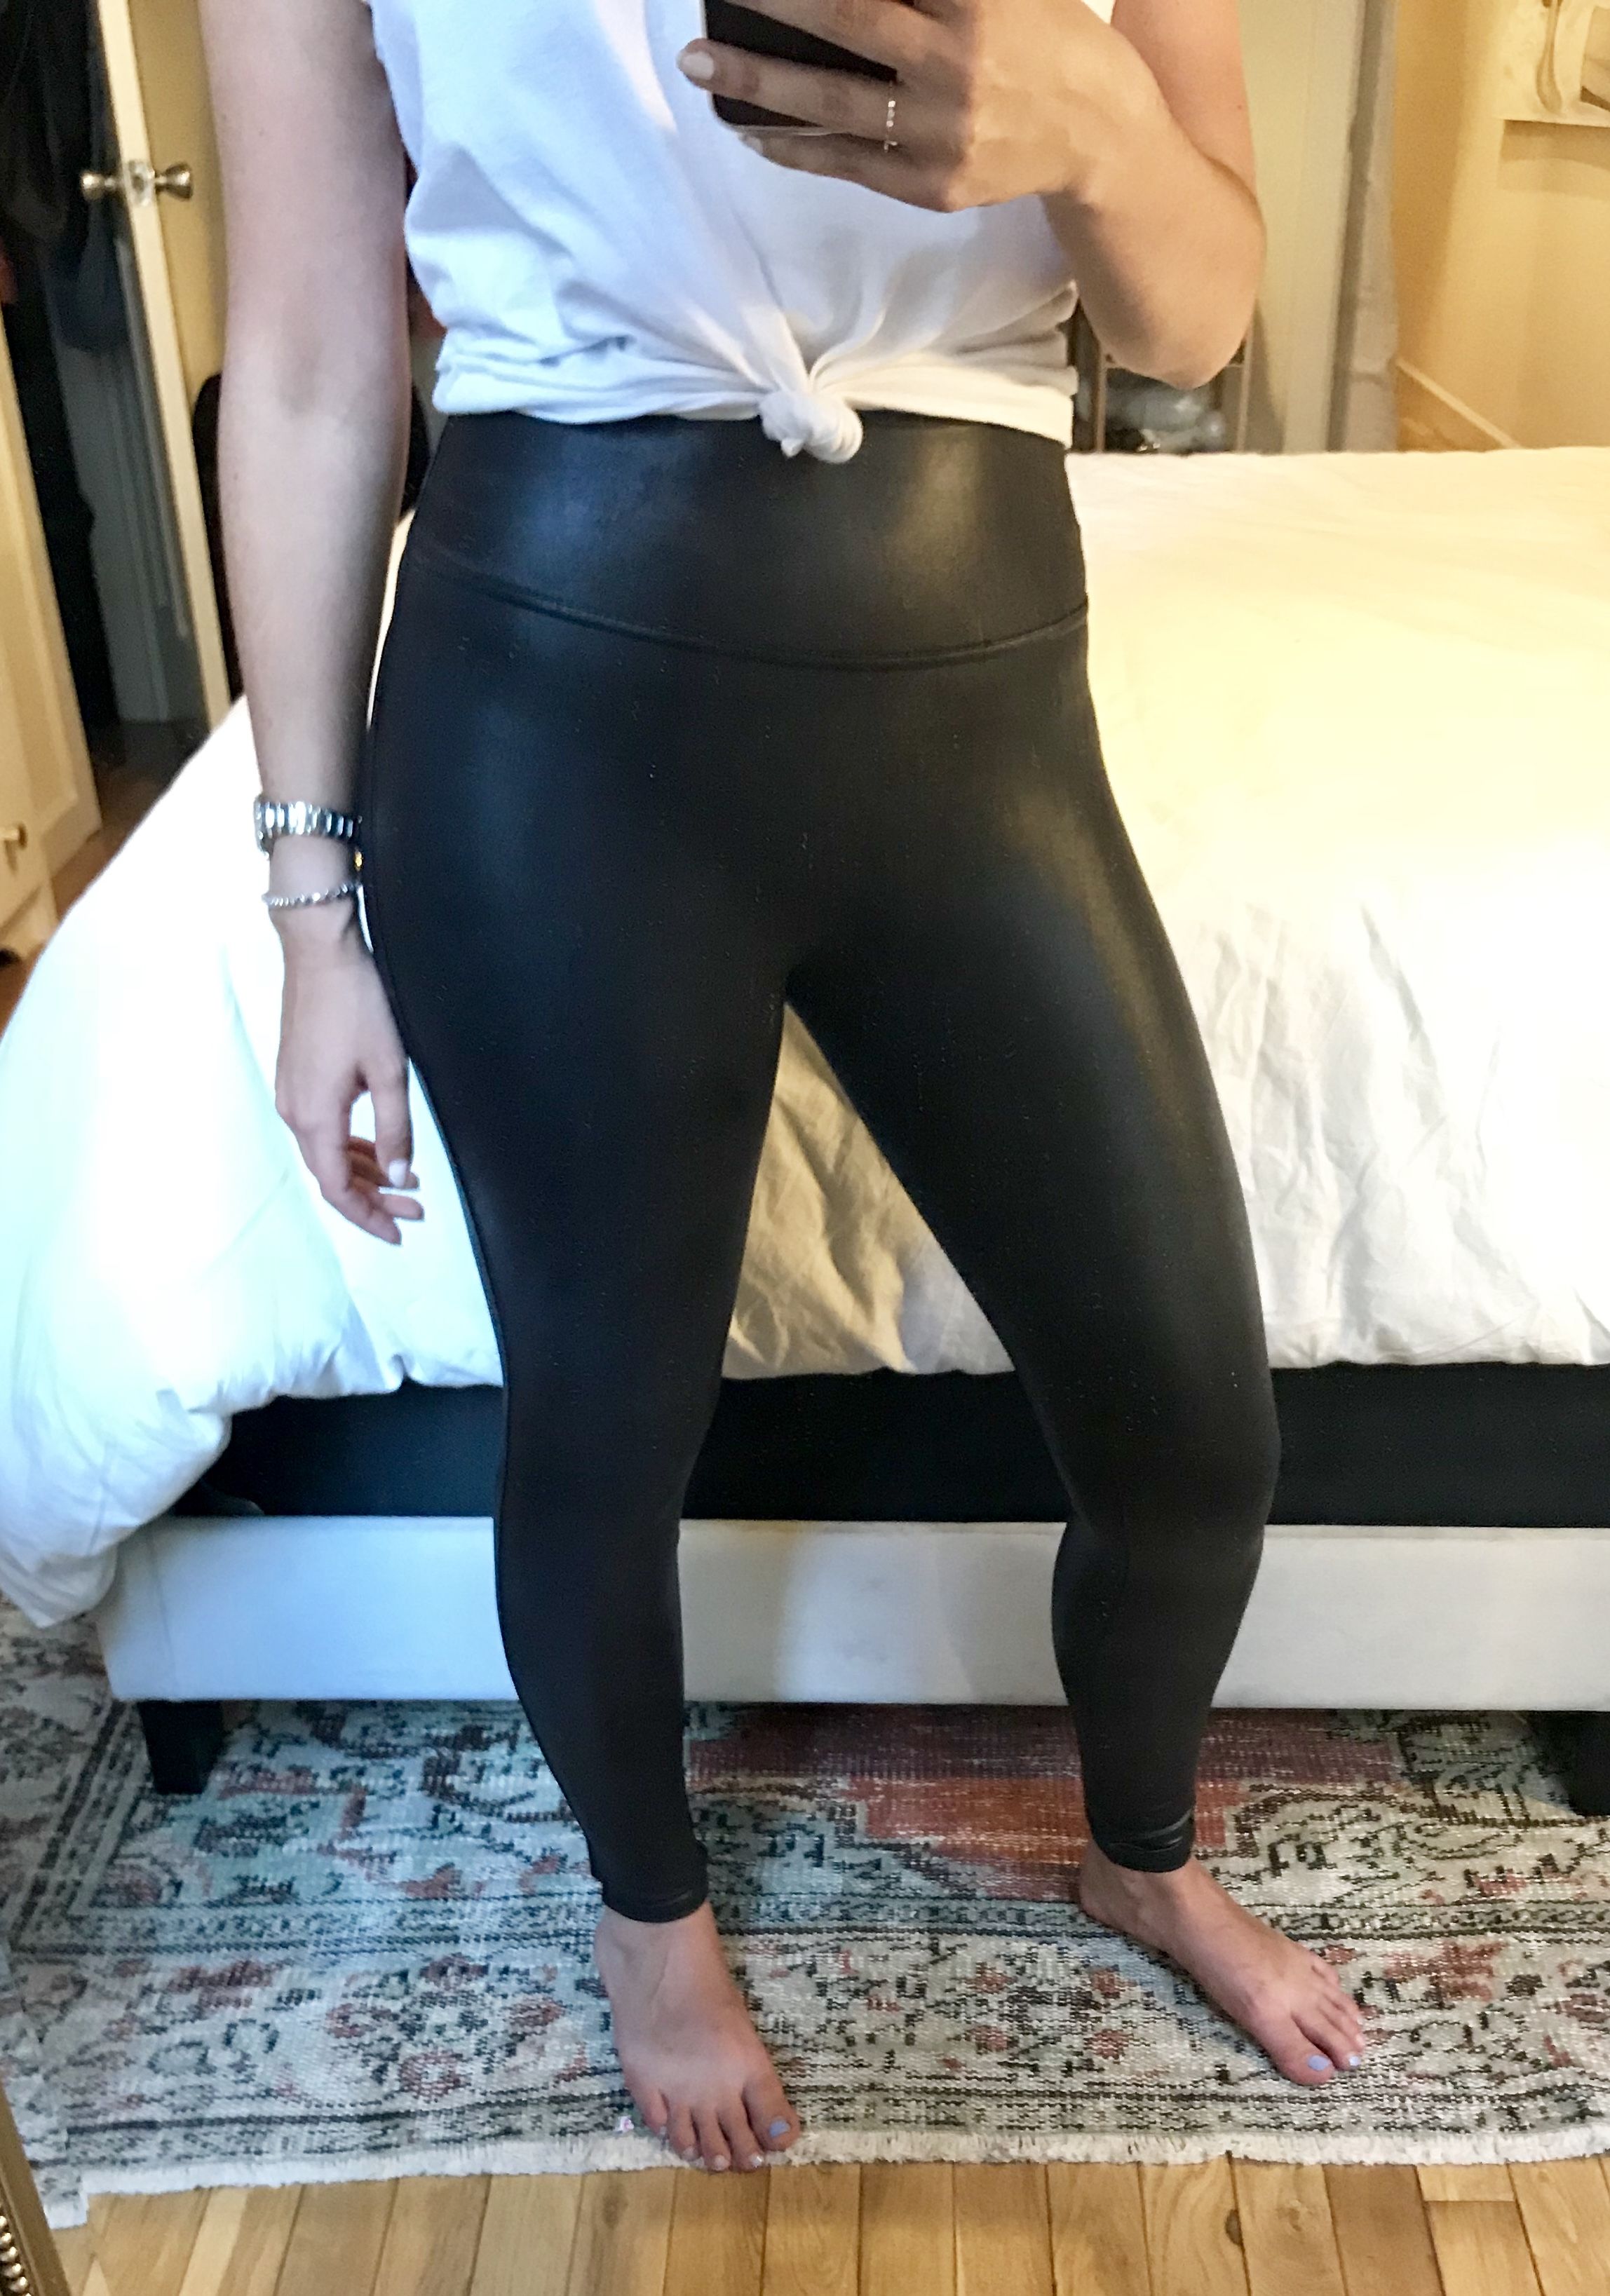 Spanx Faux Leather Leggings Review: Are They Worth the Hype?